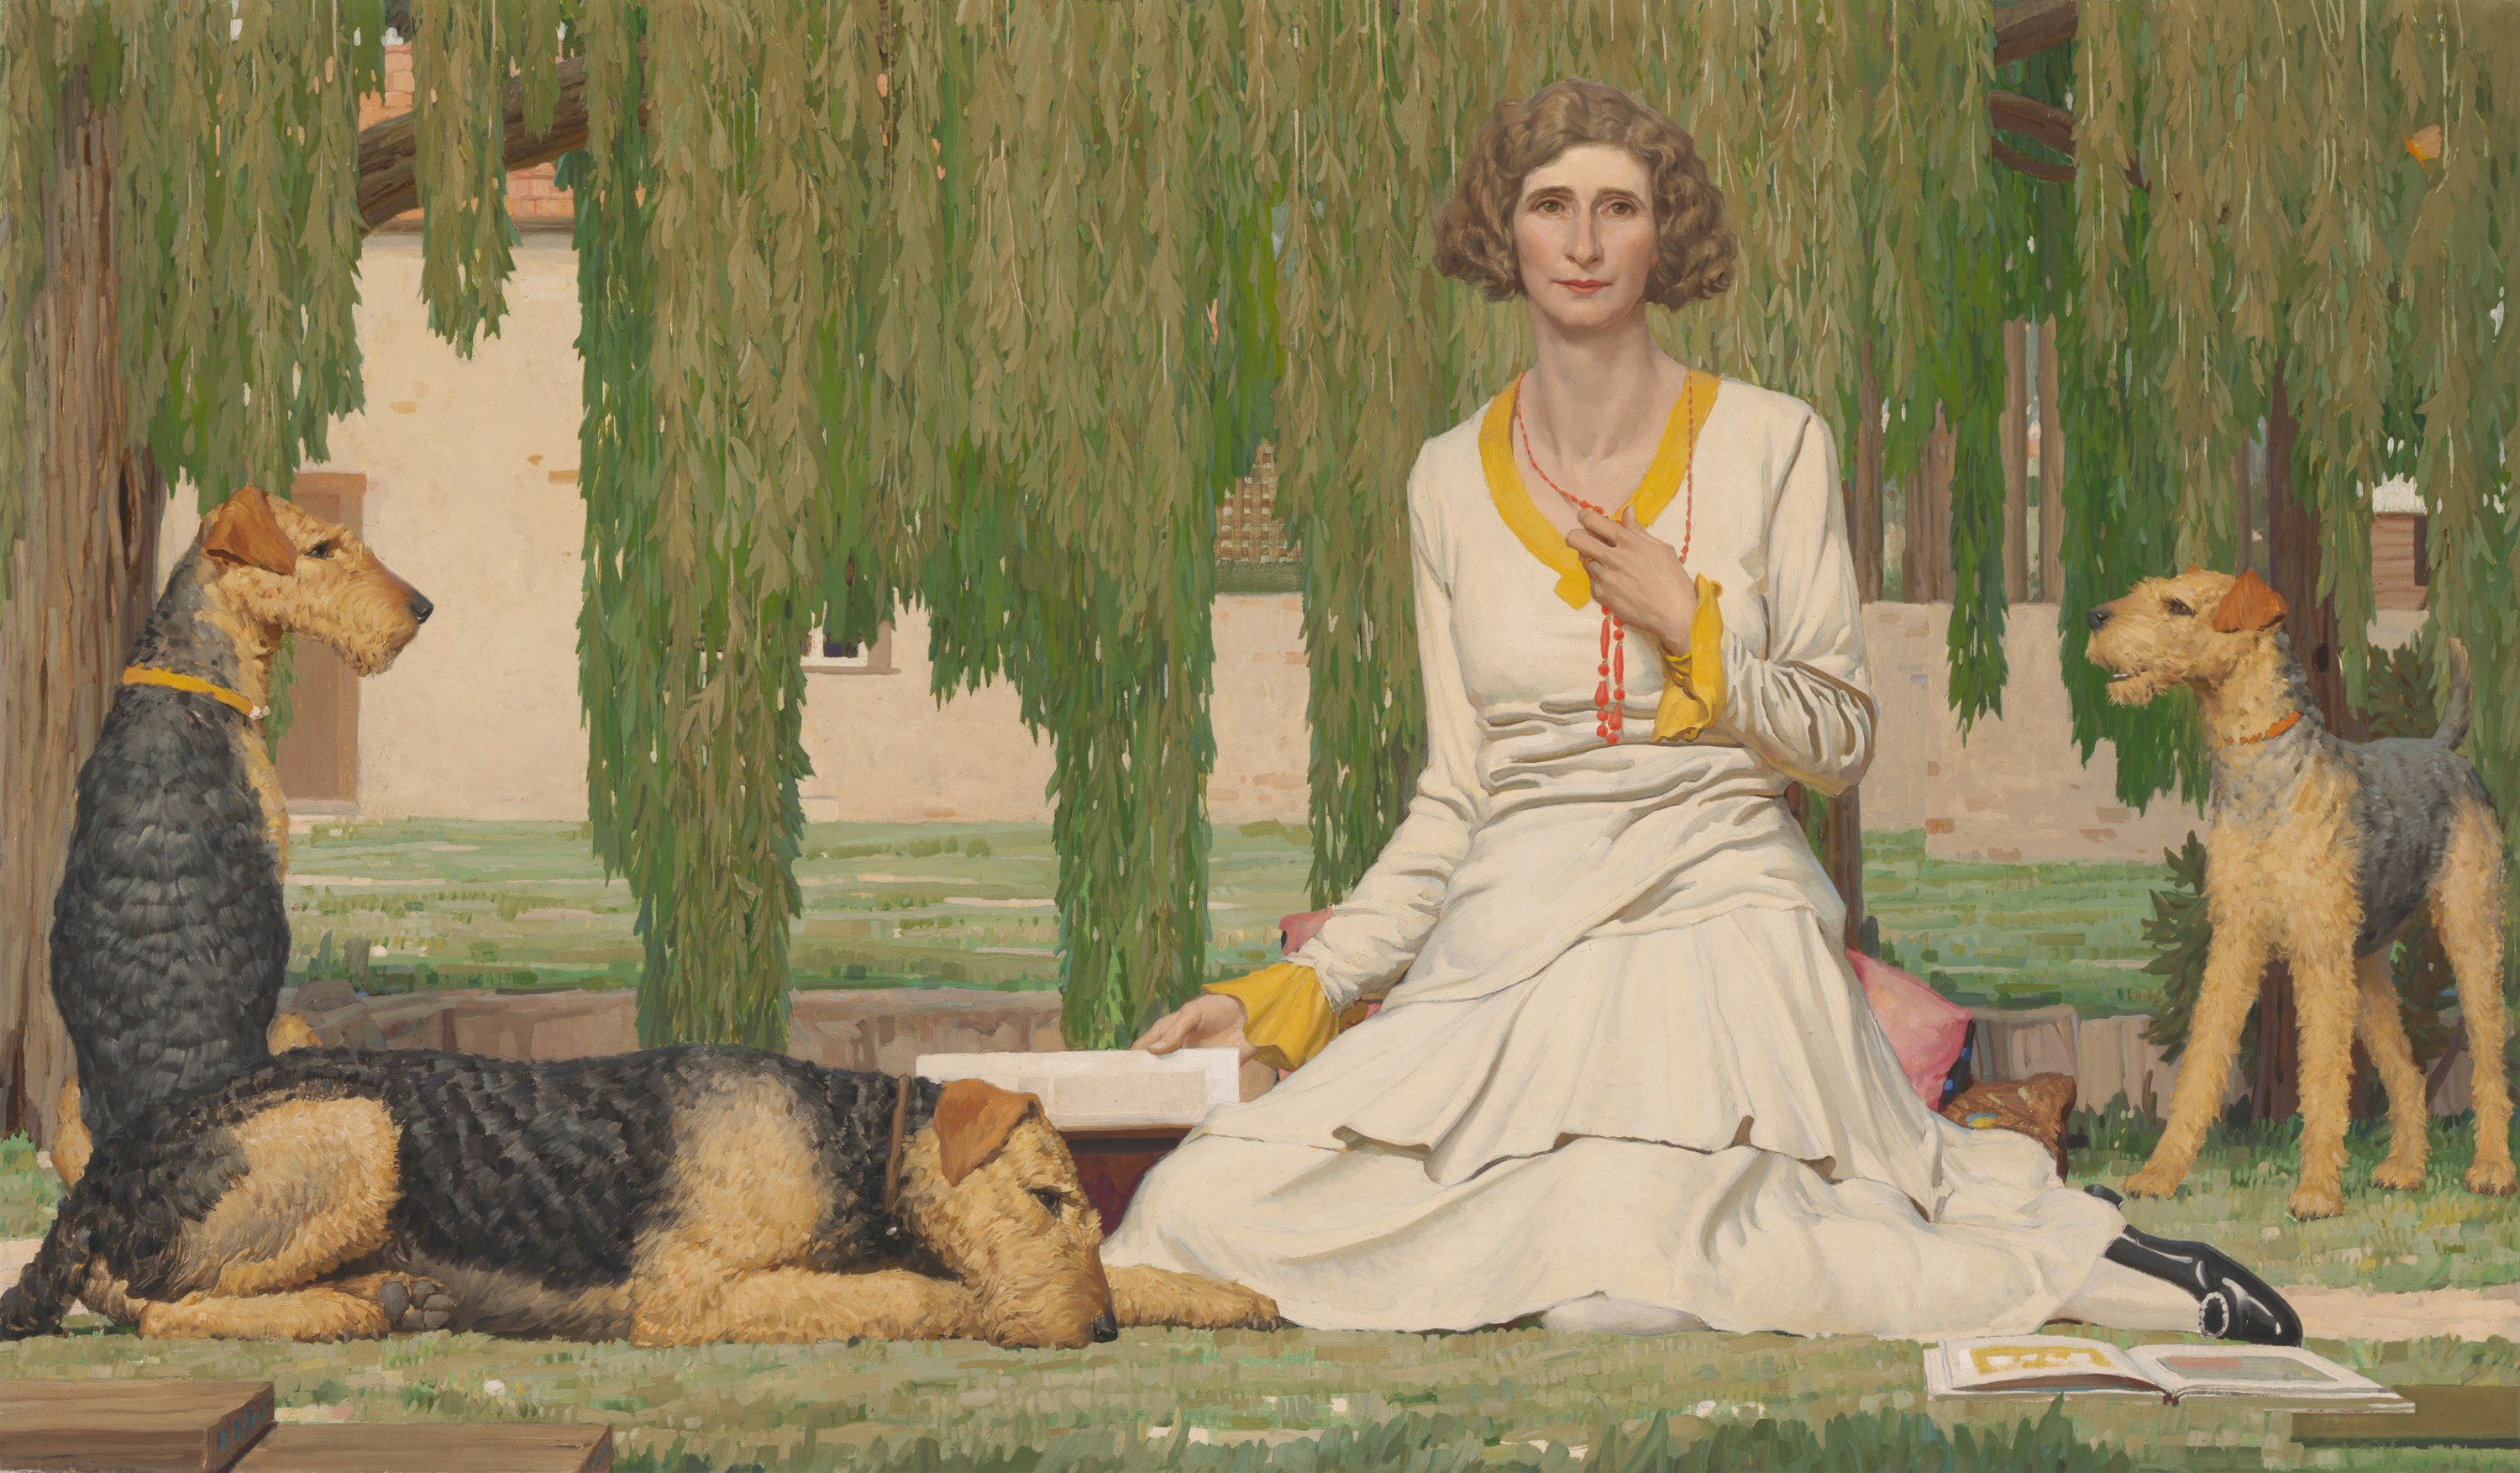 Painting by artist Napier Waller of a woman in art deco dress in a garden with three large dogs around her.